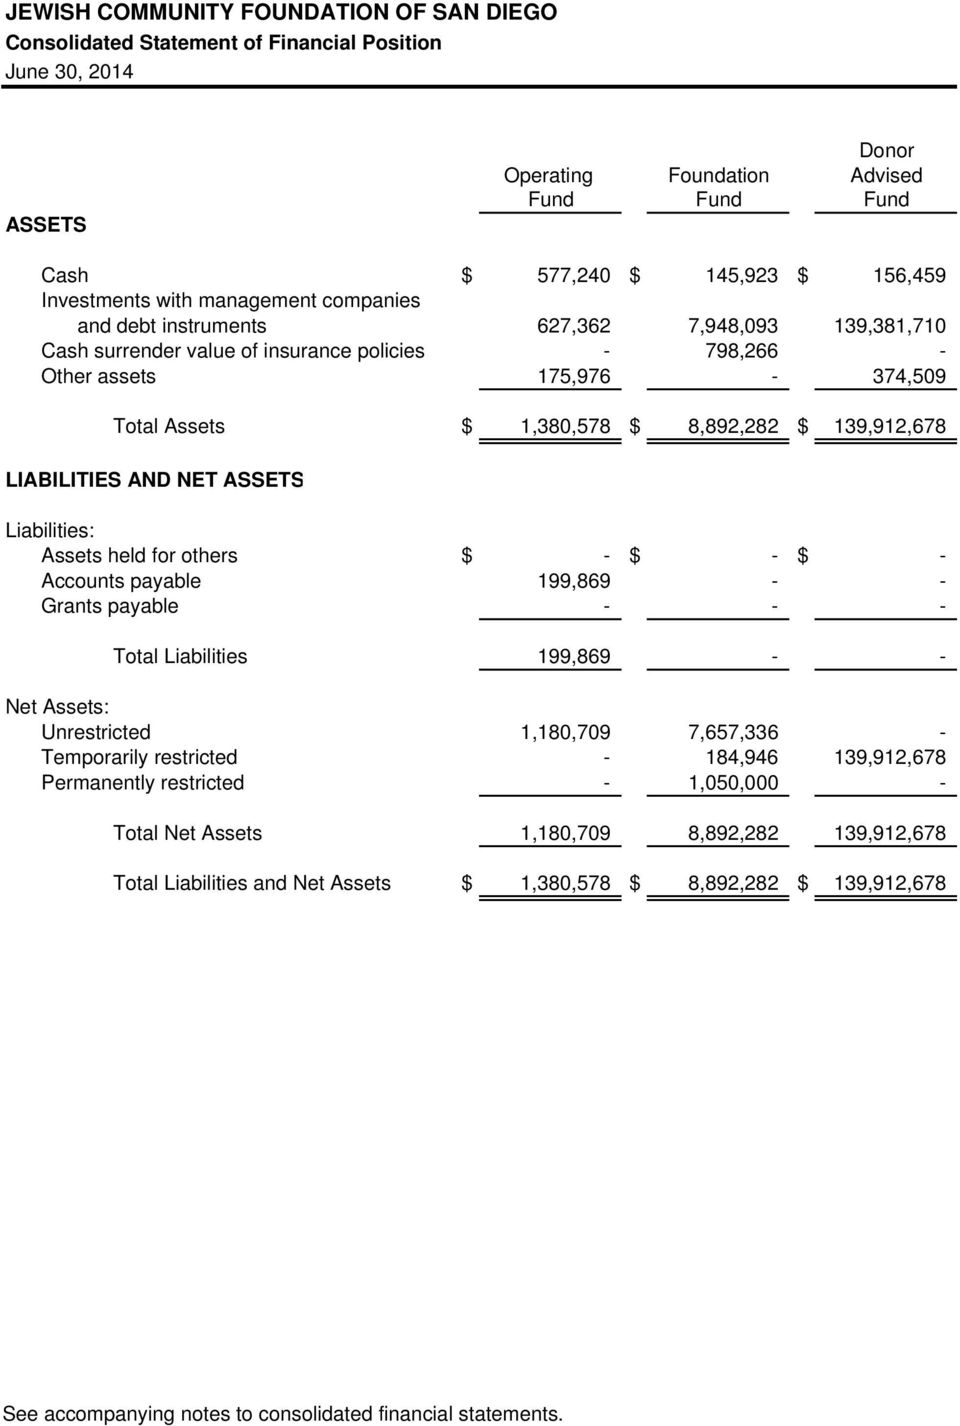 ASSETS Liabilities: Assets held for others $ - $ - $ - Accounts payable 199,869 - - Grants payable - - - Total Liabilities 199,869 - - Net Assets: Unrestricted 1,180,709 7,657,336 - Temporarily